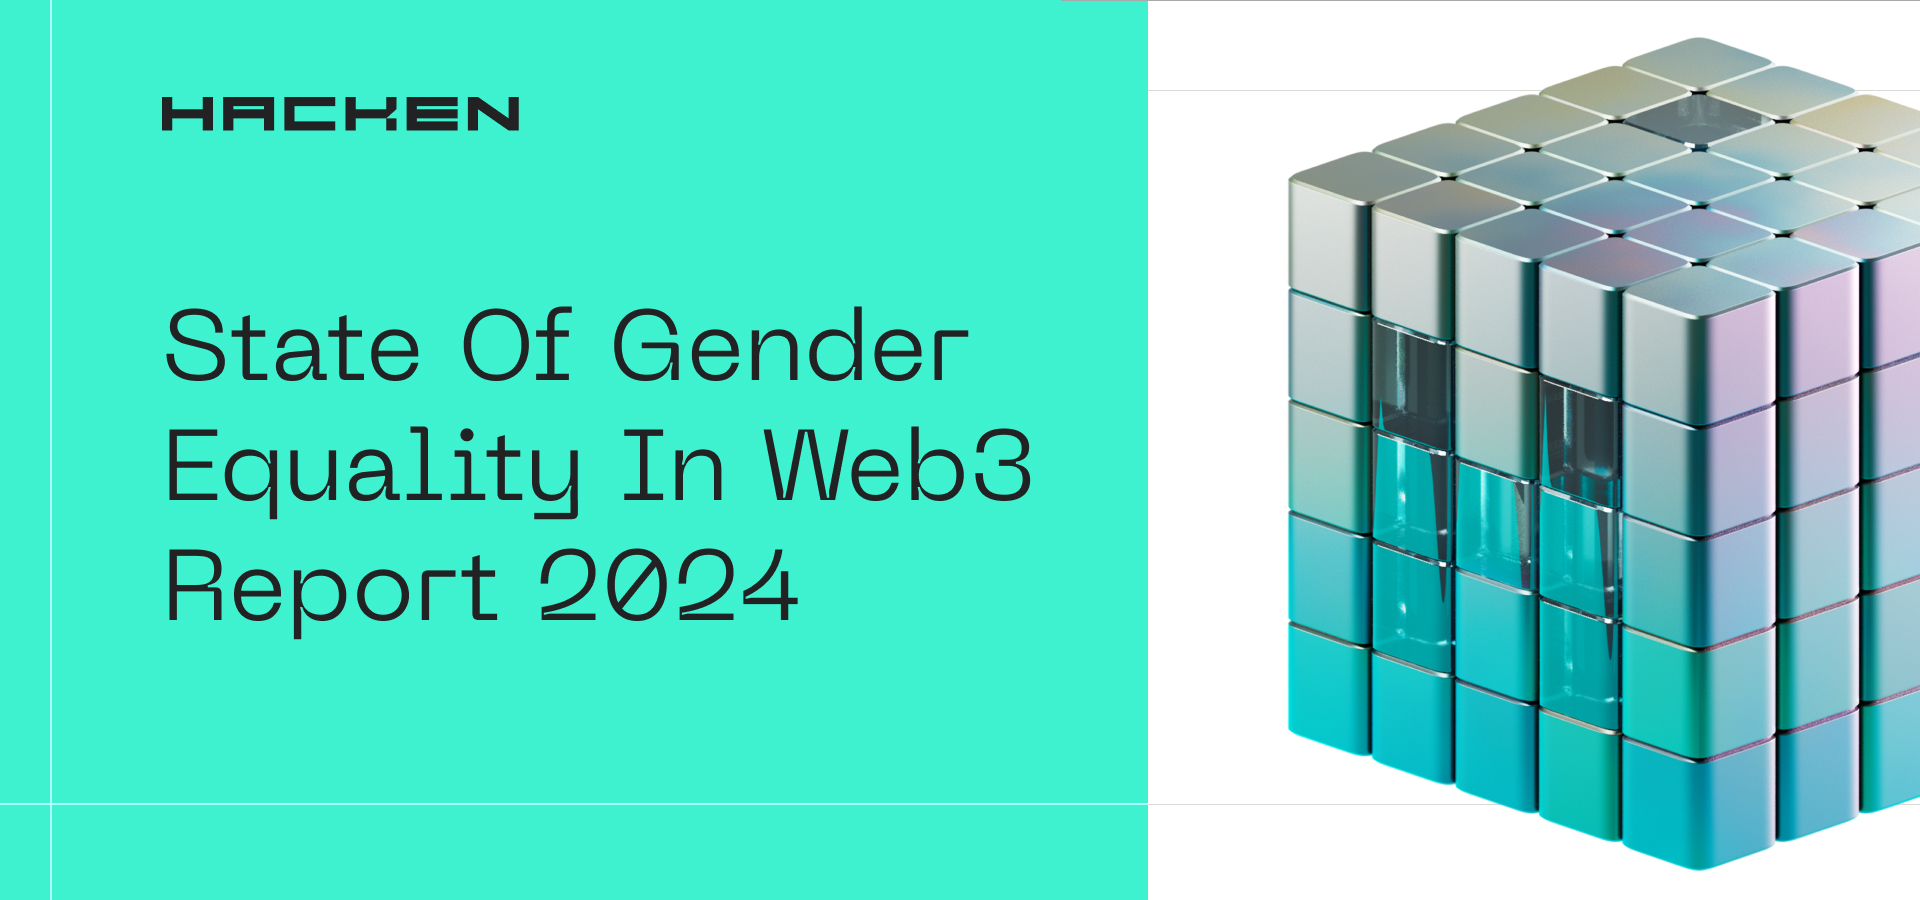 Hacken’s 2024 Report on Gender Equality in Web3